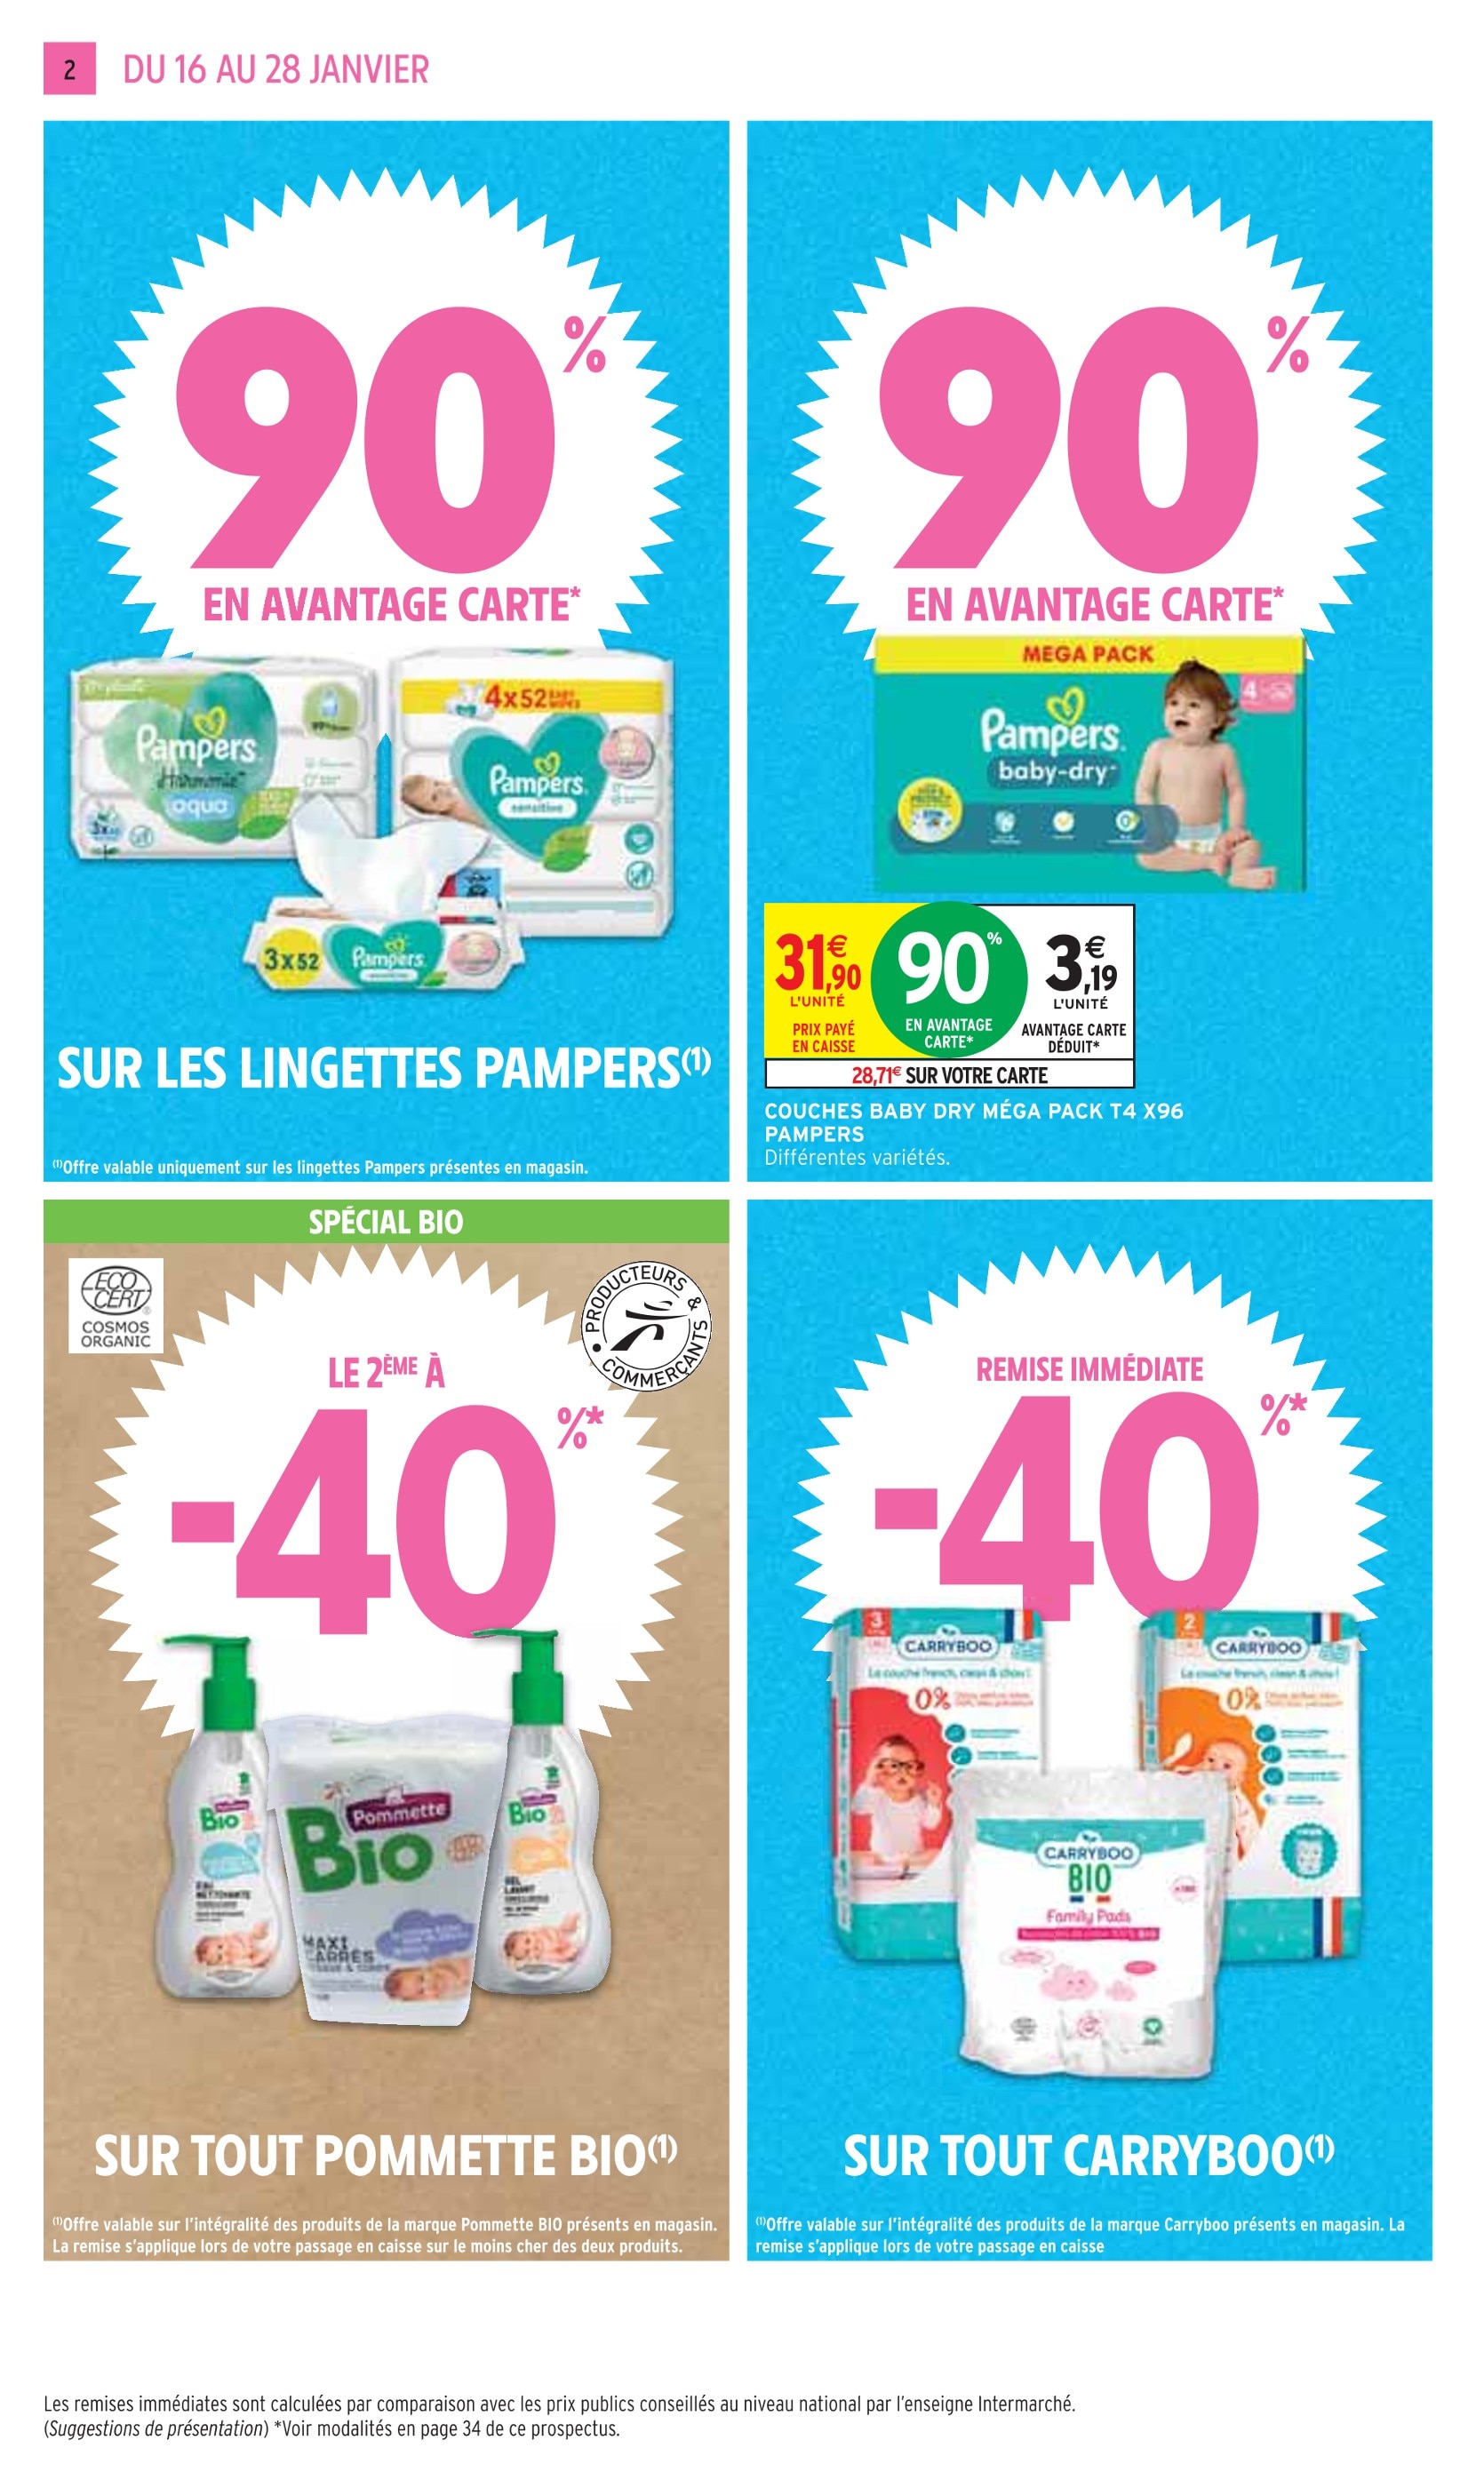 Stokomani - En ce moment, les 94 couches Pampers Baby-dry